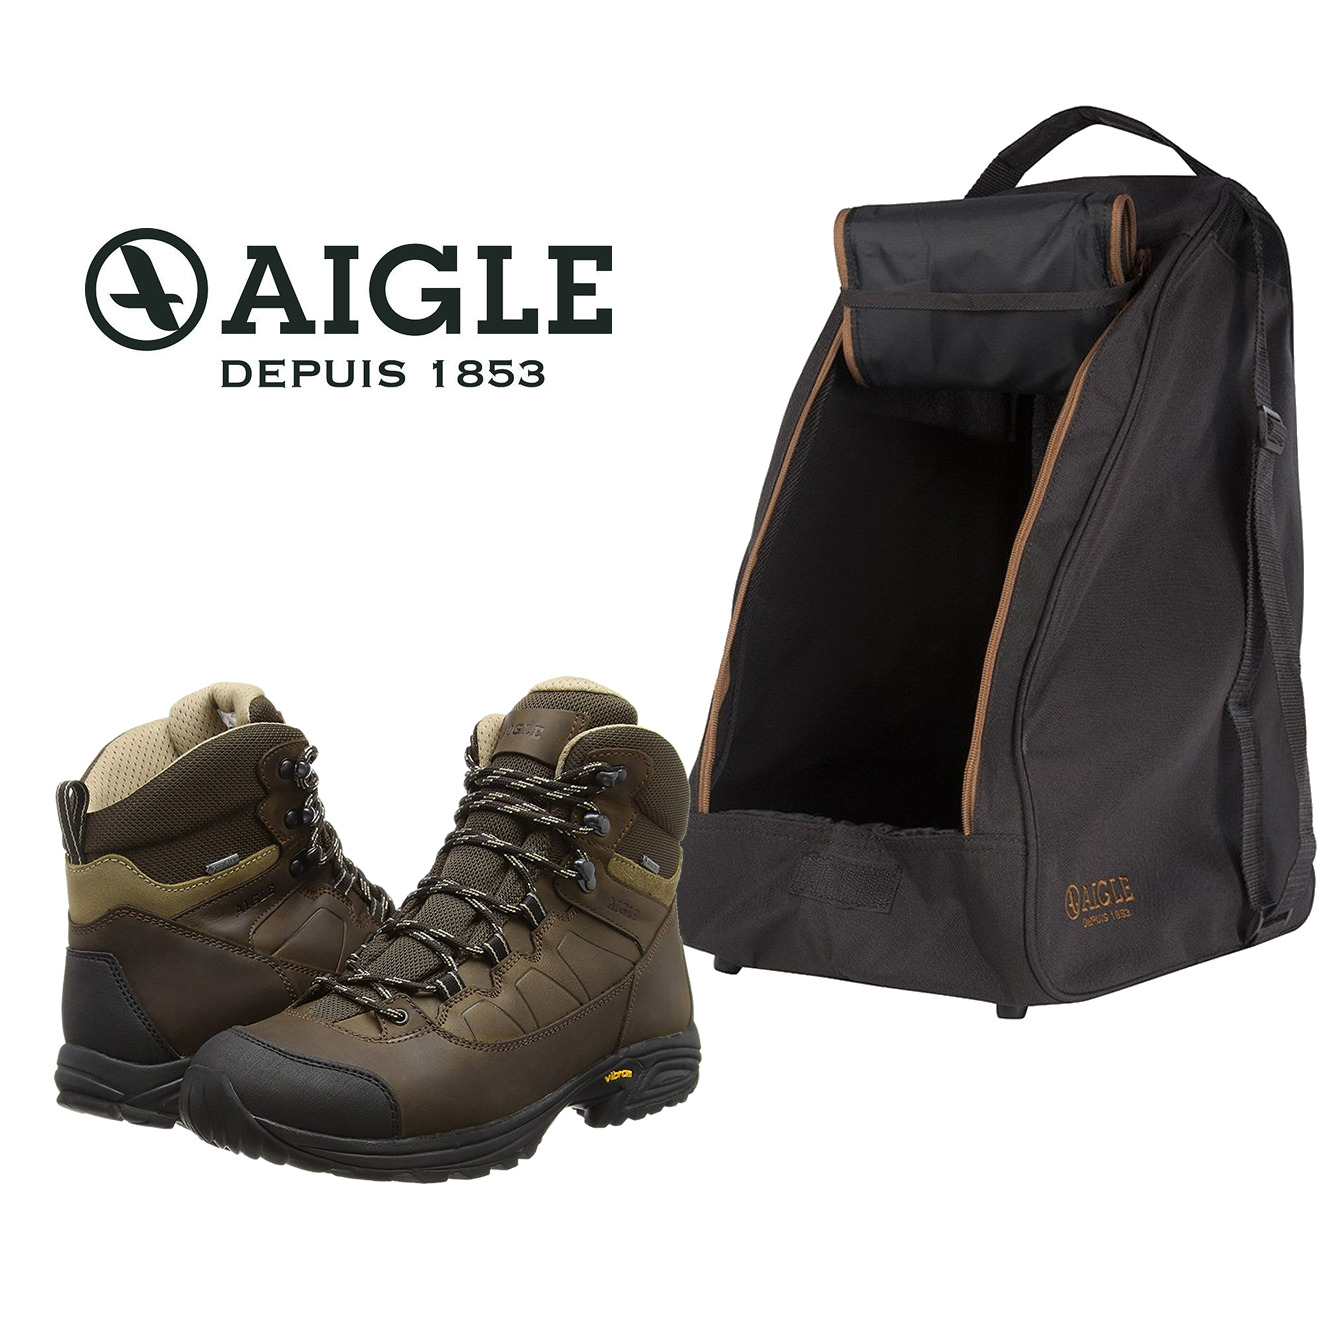 Gore Tex walking boots with Aigle boot 